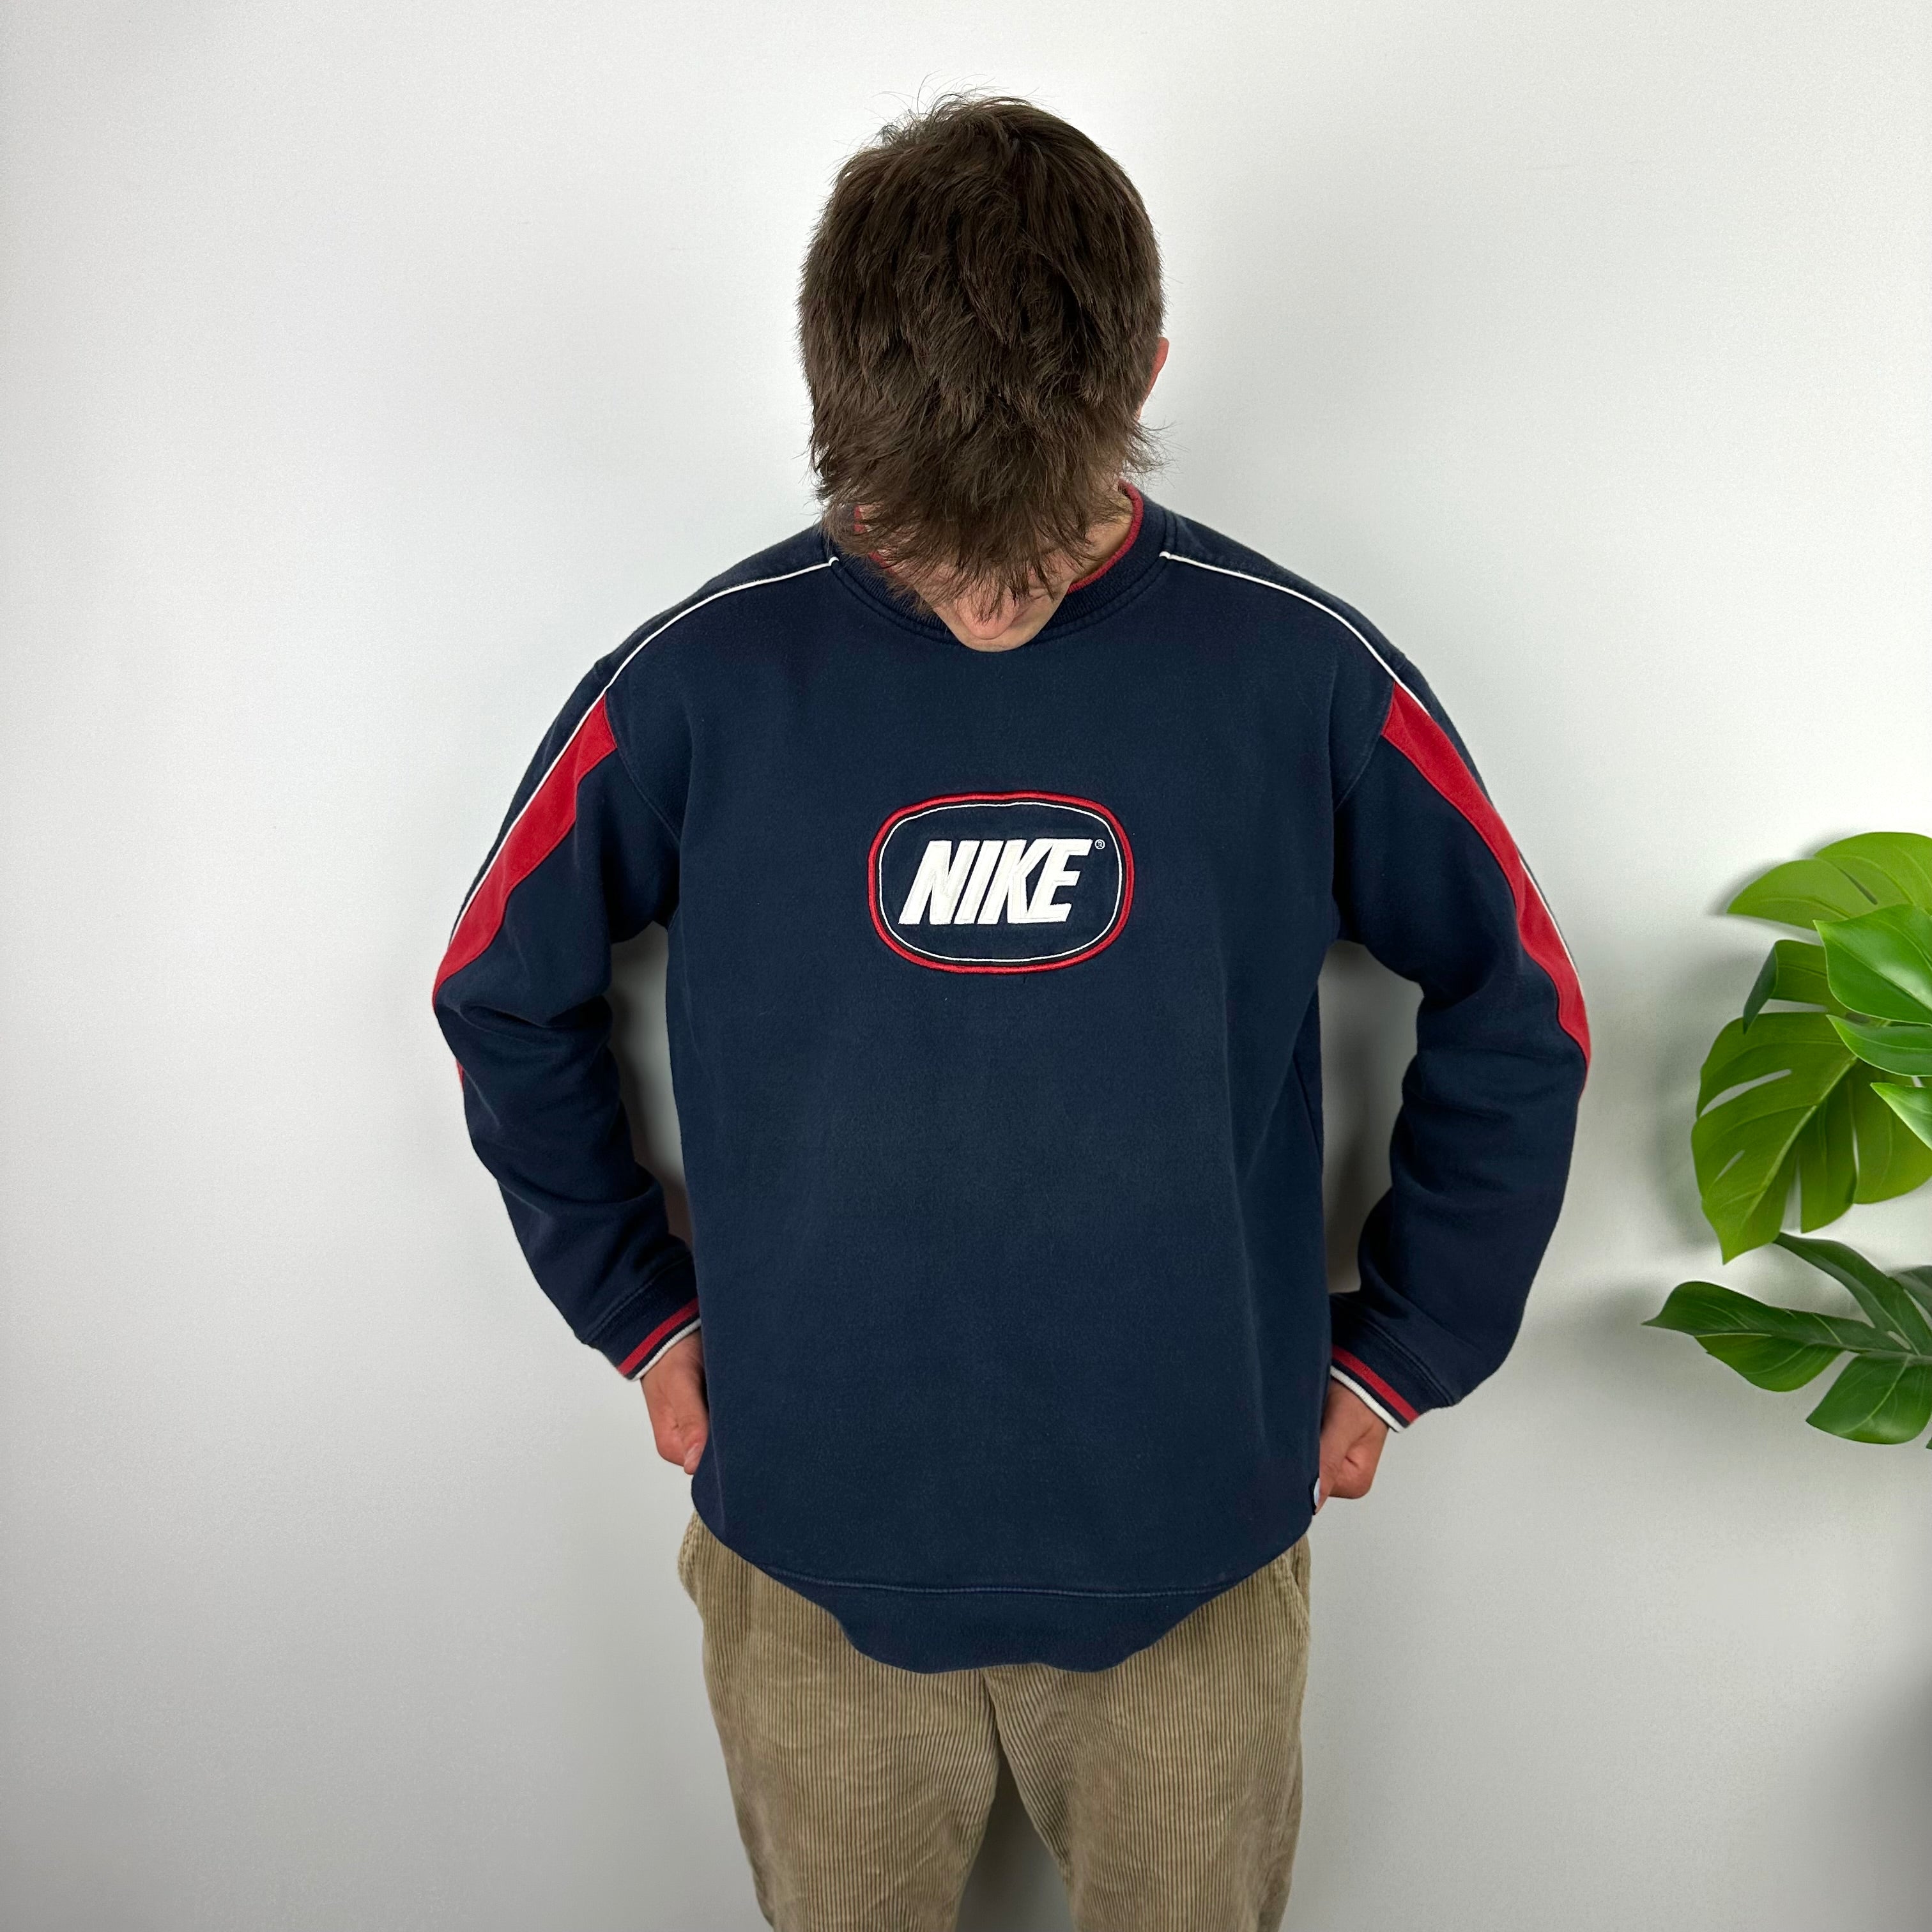 Nike Navy Embroidered Spell Out Sweatshirt (XL)